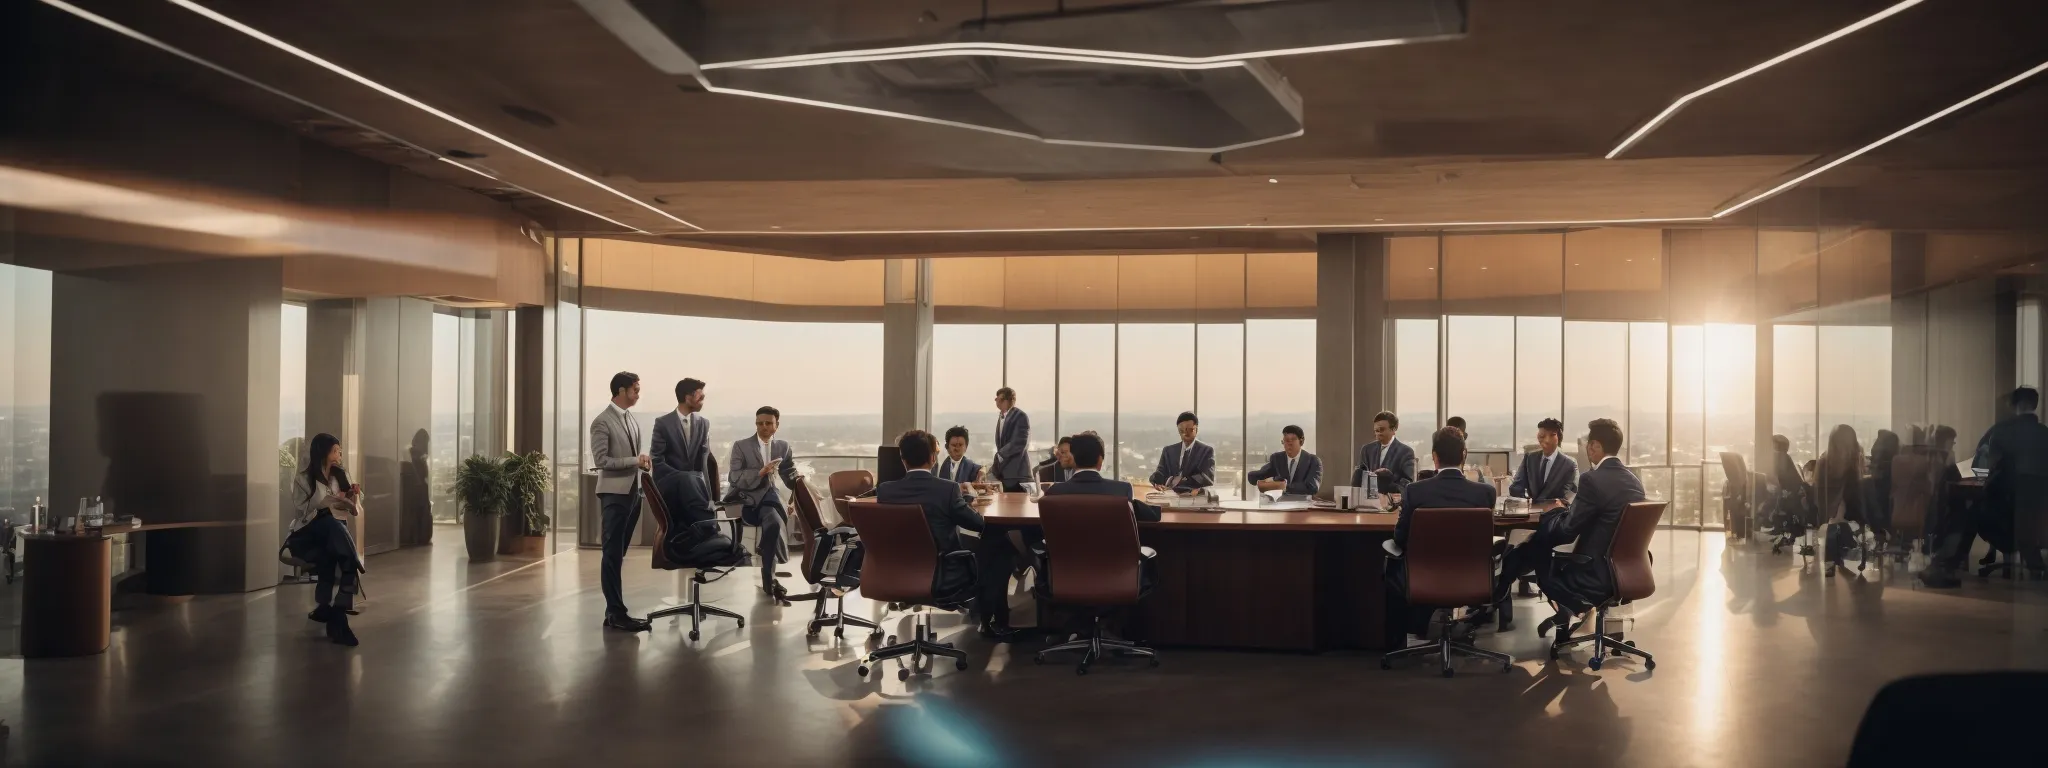 a group of professionals clustered around a high-tech conference table as the evening light bathes the modern meeting room.